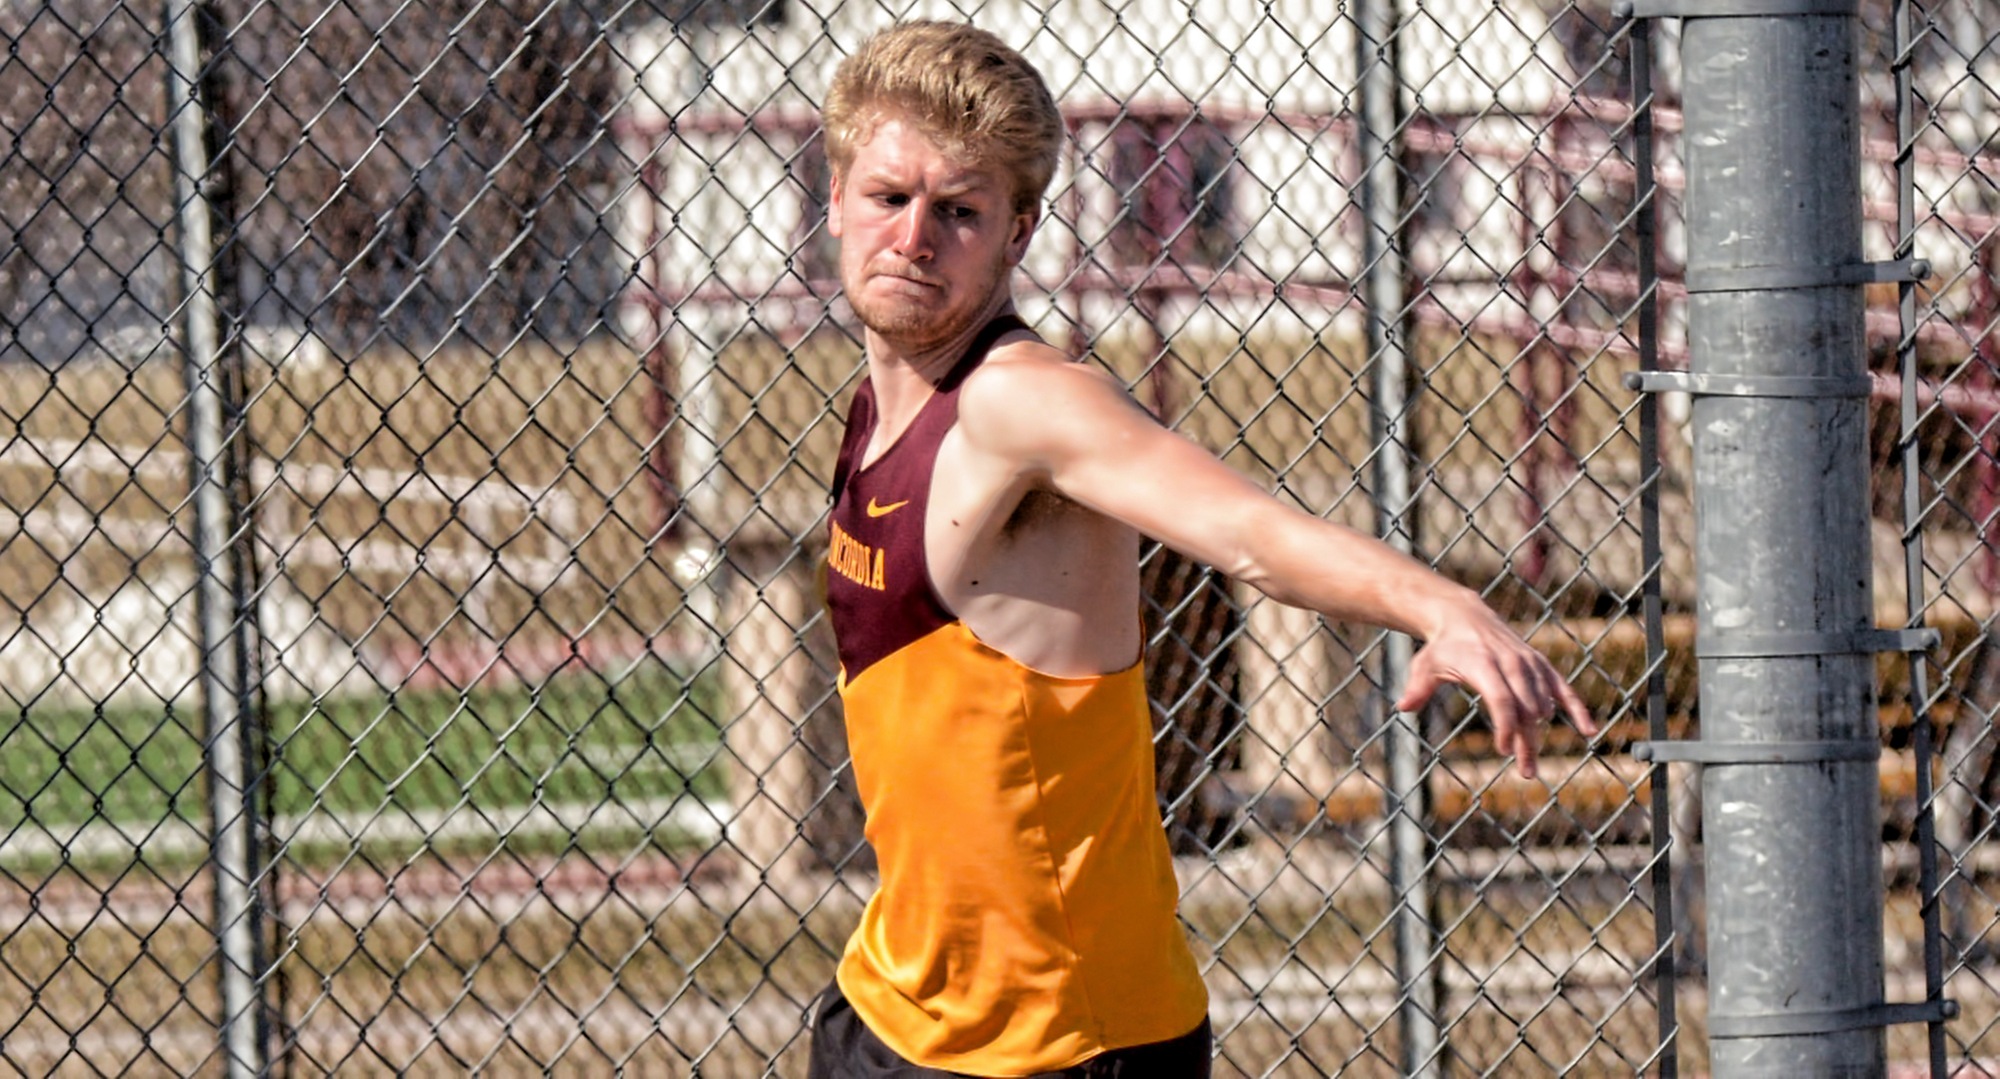 Sophomore Matt Bye recorded a career-best 6,300 points in the decathlon at the North Central Gregory Meet and unofficially qualified for the NCAA National Meet.